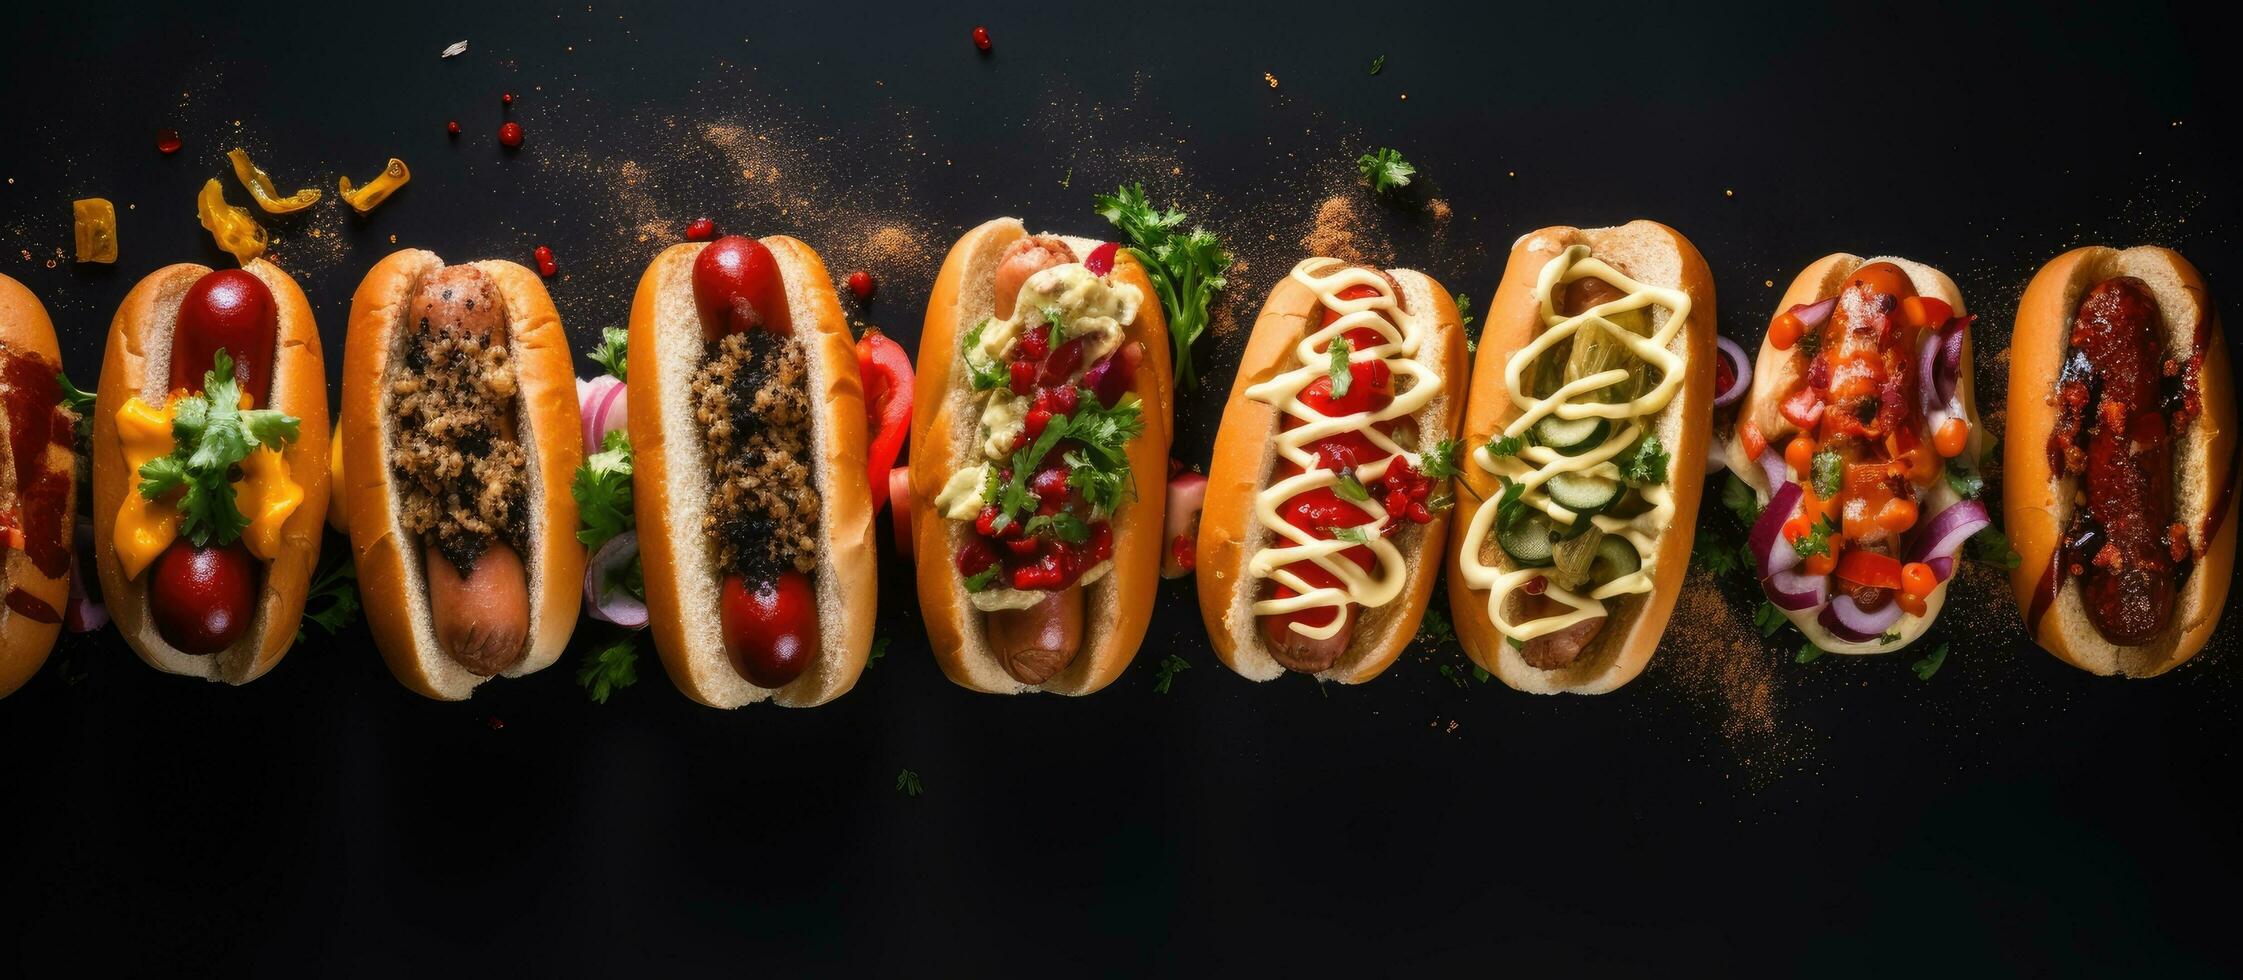 A dark background with various toppings on hot dogs. food background with space for text, seen photo